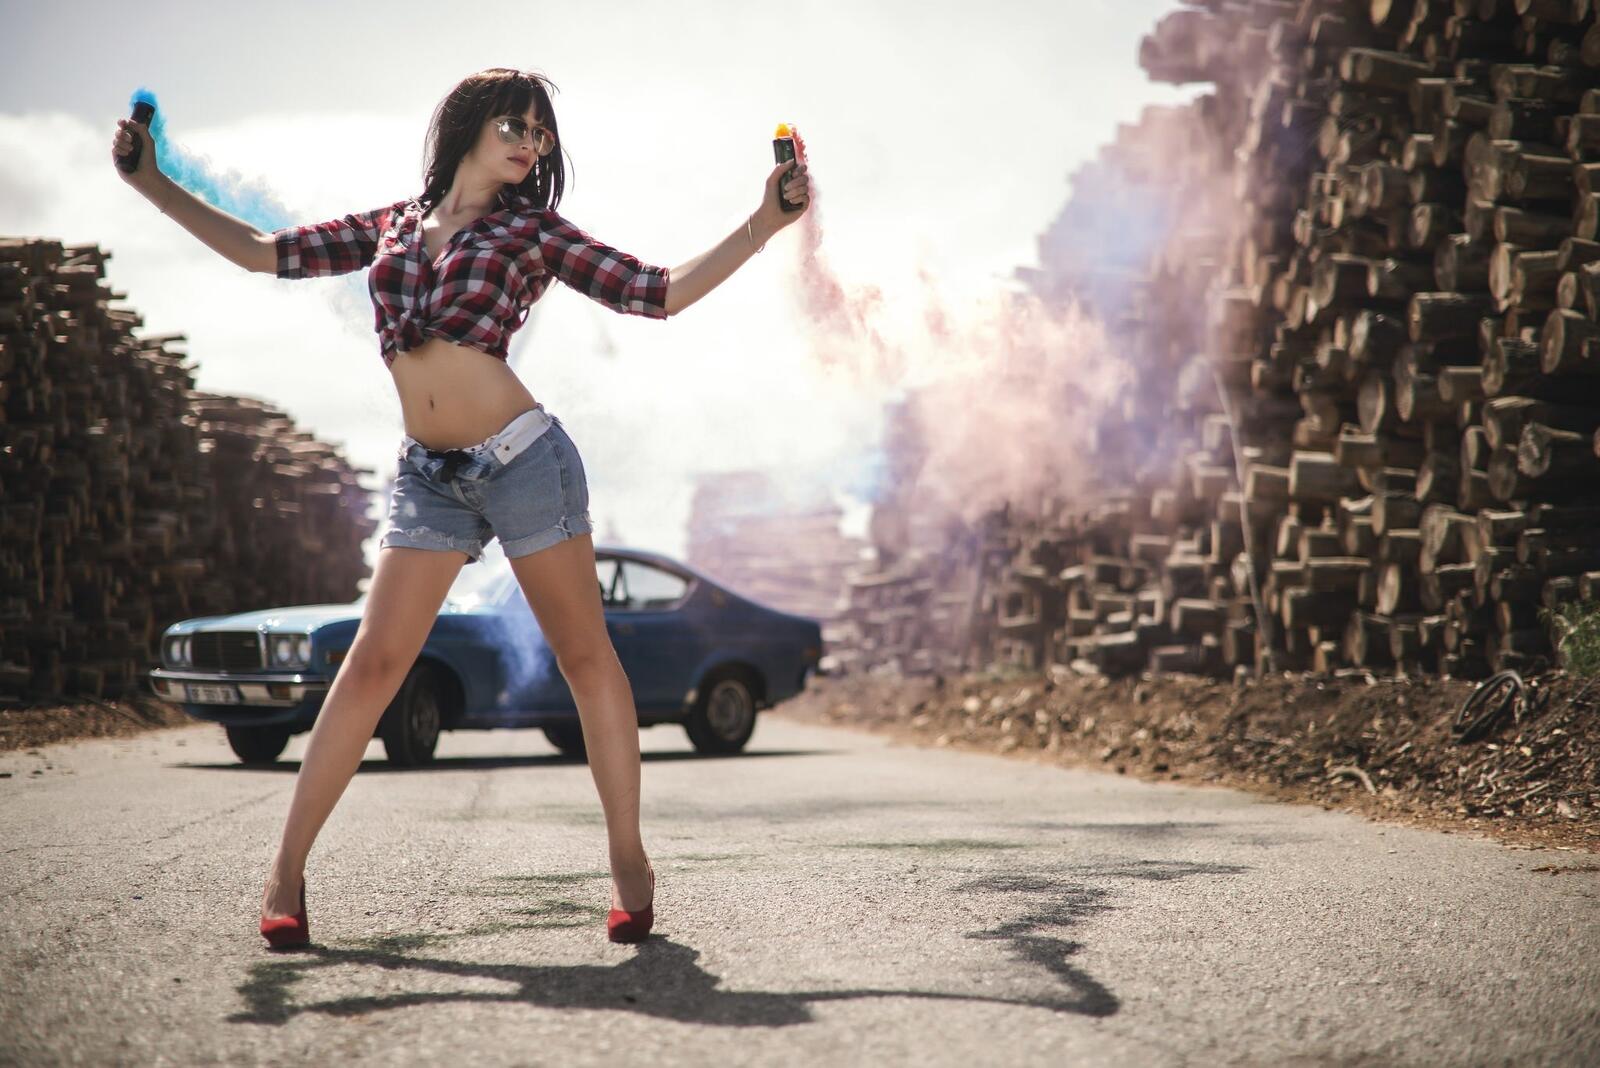 Free photo A girl in short shorts standing in front of a car with smoke bombs in her hands.